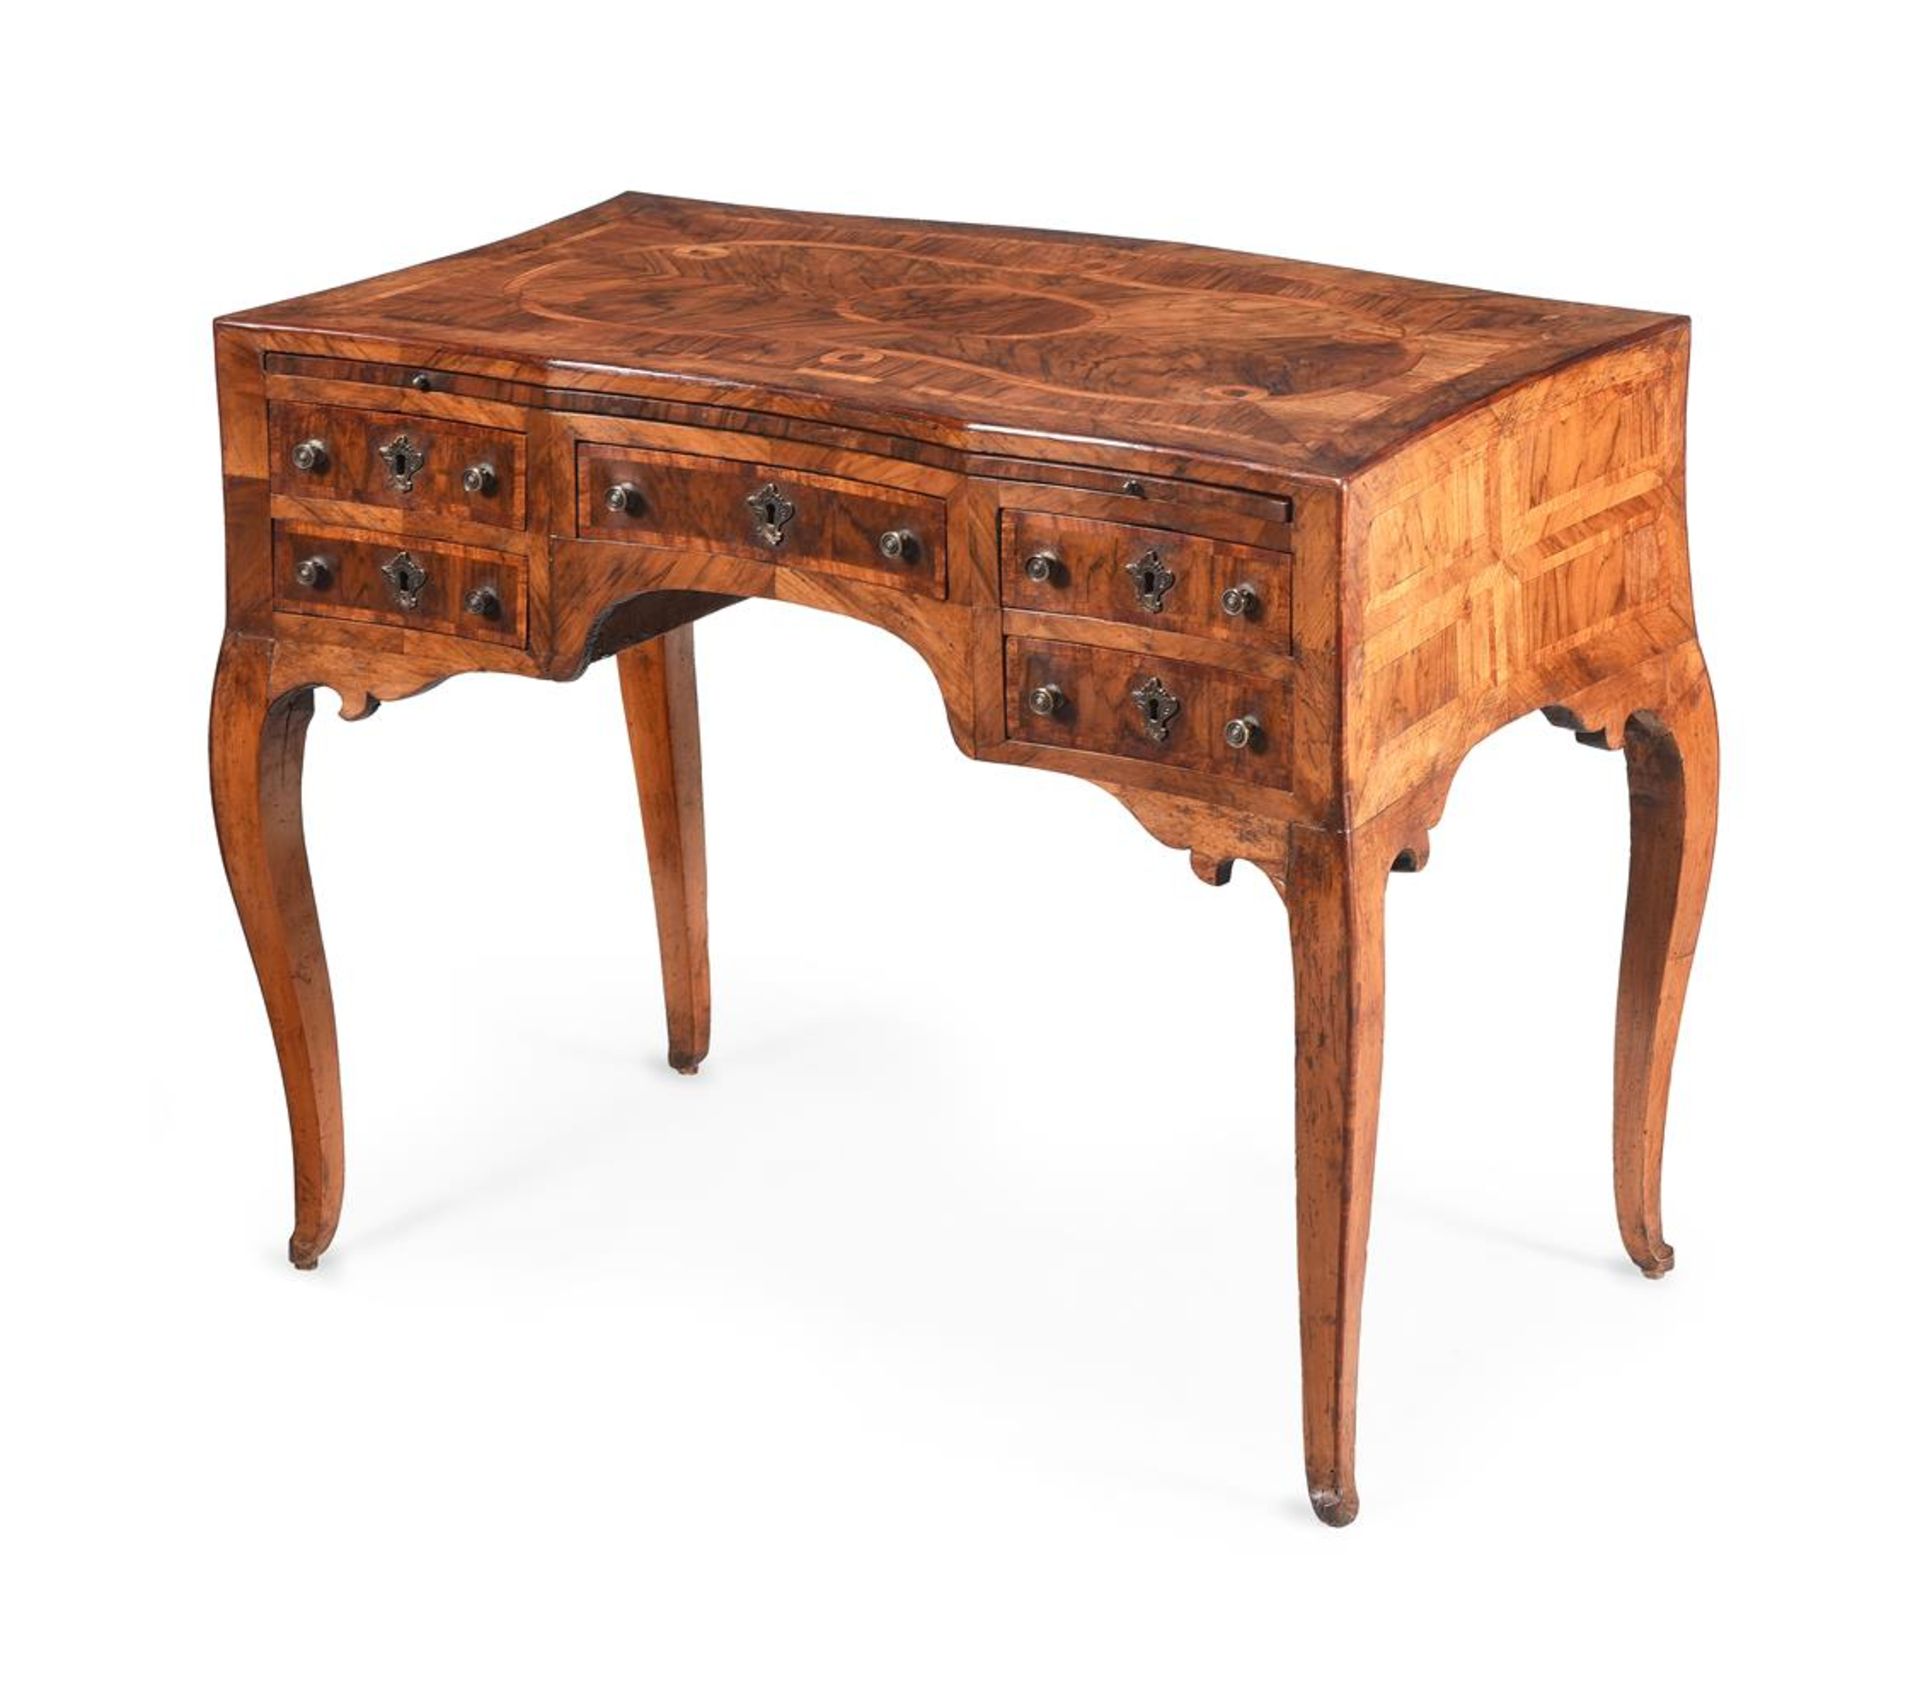 A NORTH ITALIAN FIGURED WALNUT AND CROSSBANDED SERPENTINE DRESSING TABLE, LATE 18TH CENTURY - Image 2 of 8